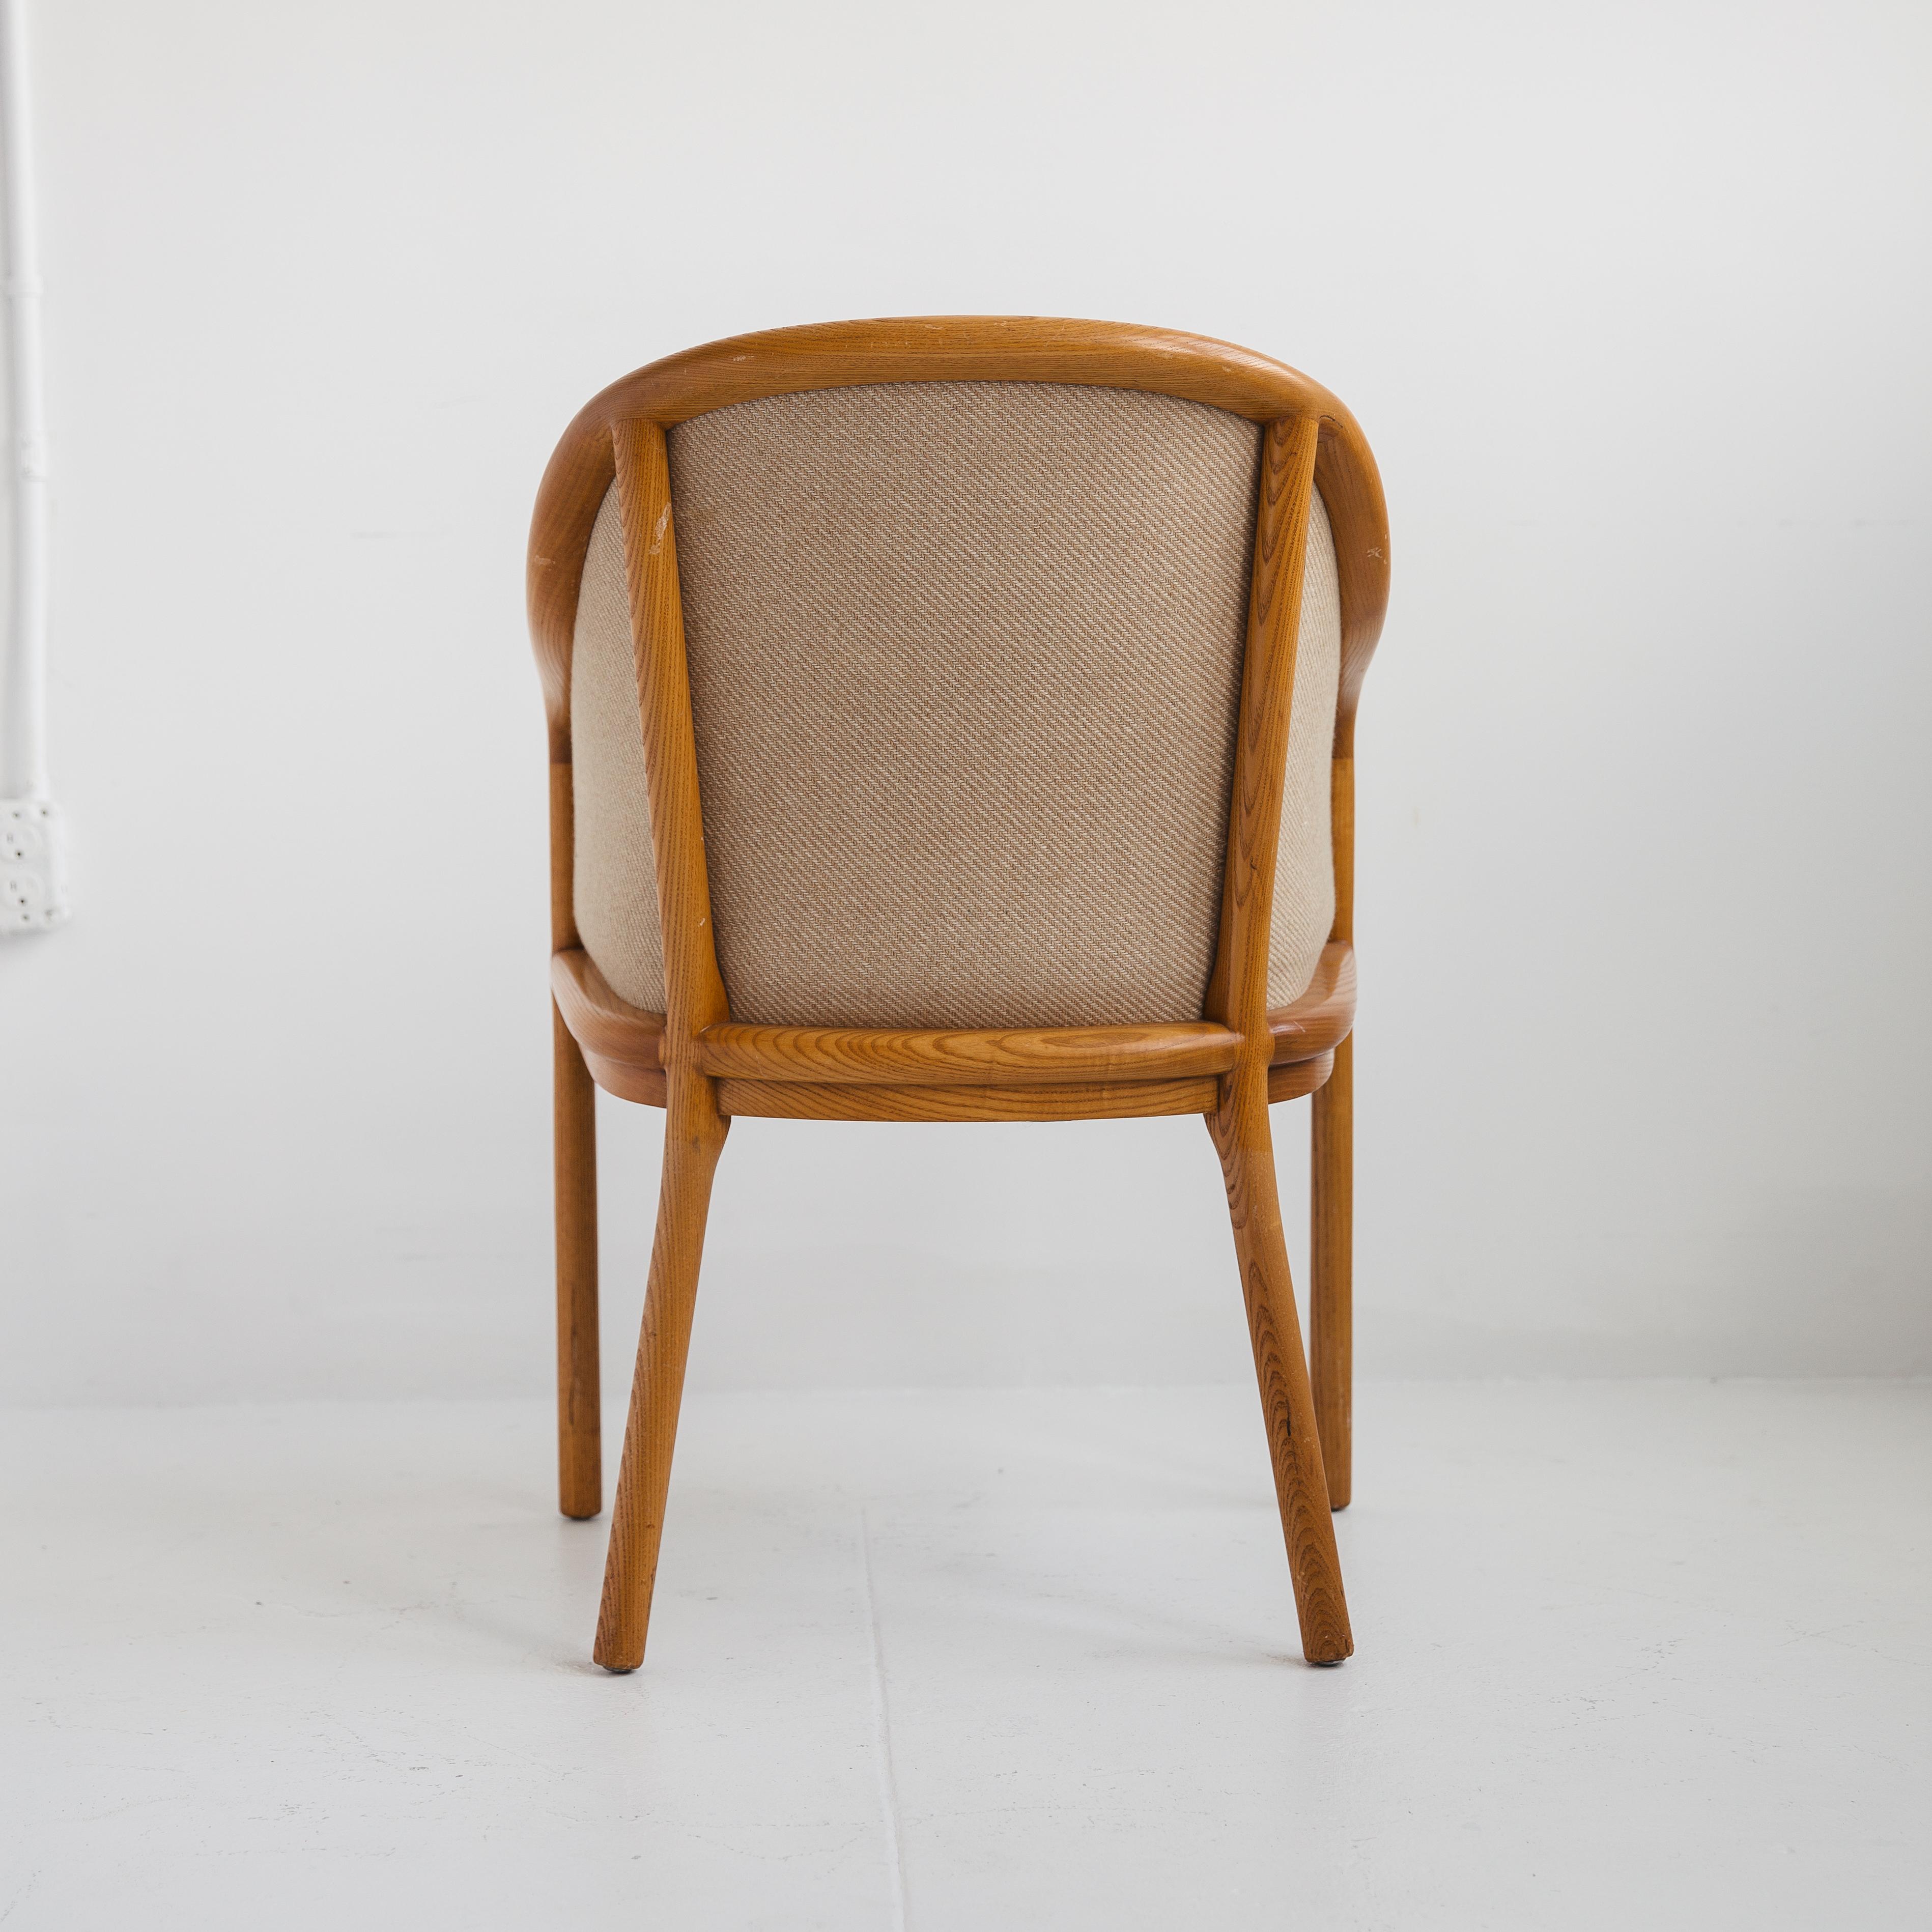 Six Vintage Upholstered Ward Bennett Dining Chairs, Mid-Century, American In Good Condition For Sale In New York, NY